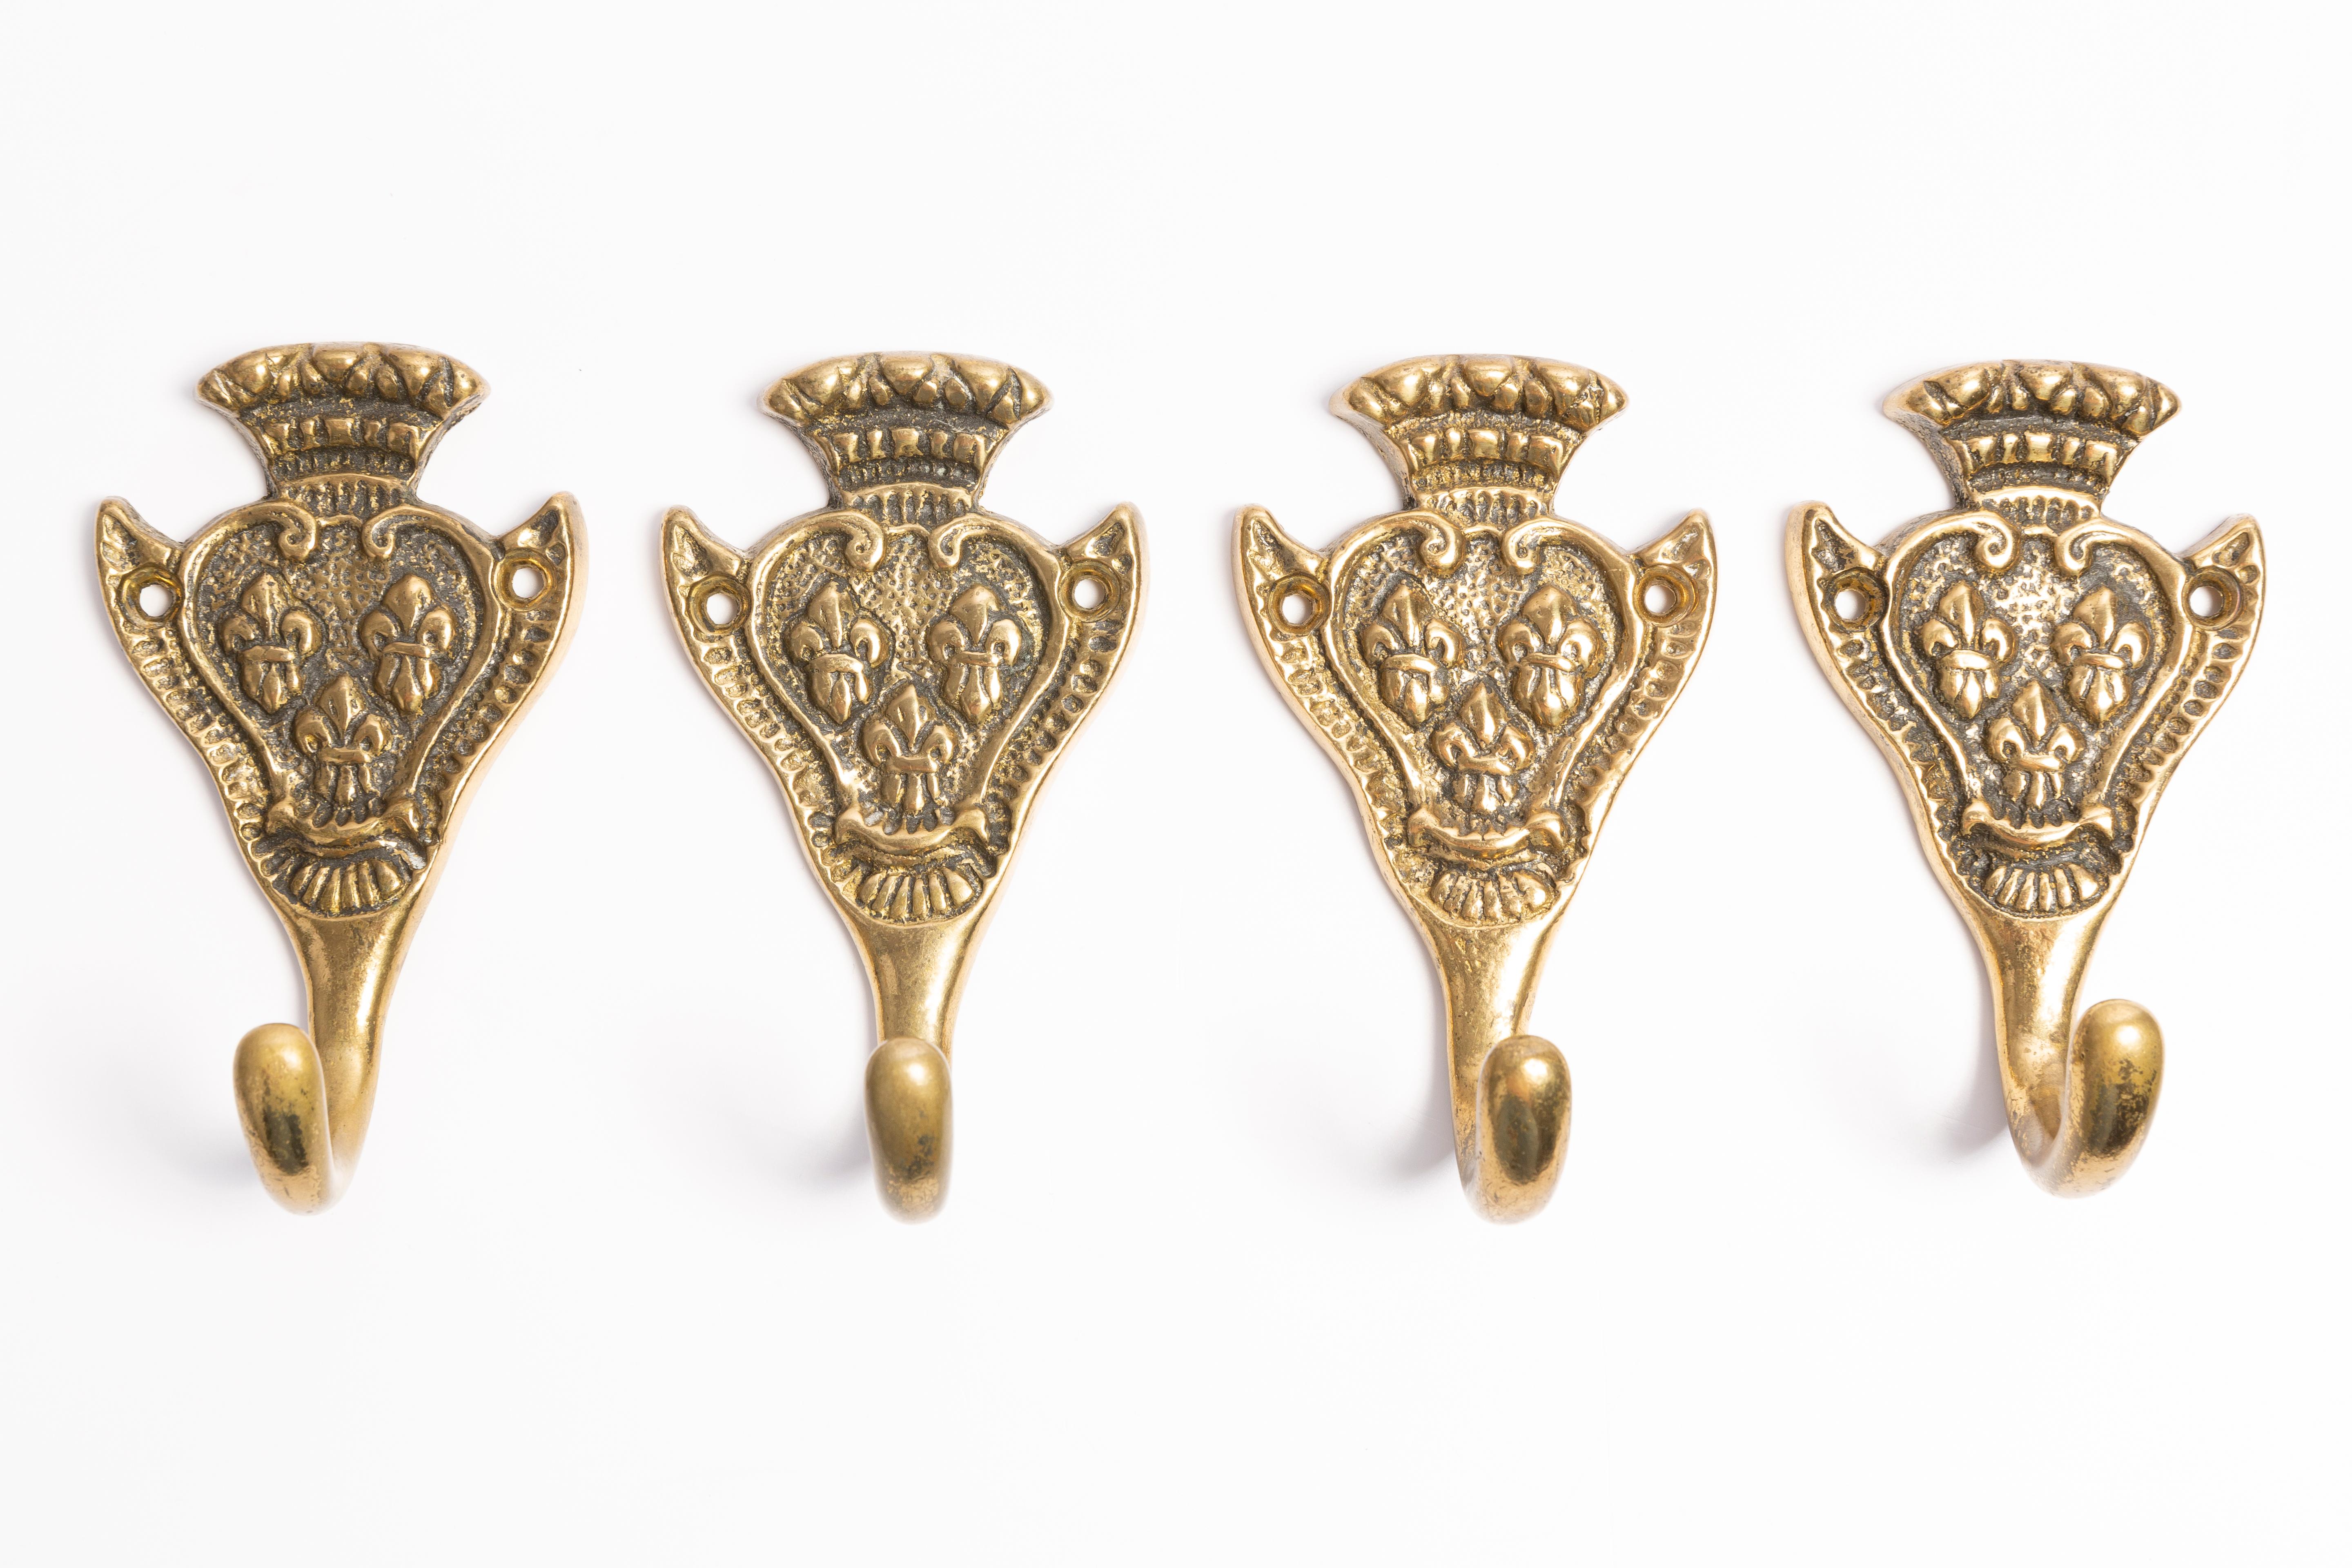 20th Century Set of Four Vintage Gold Decorative Wall Hangers, Europe, 1960s For Sale